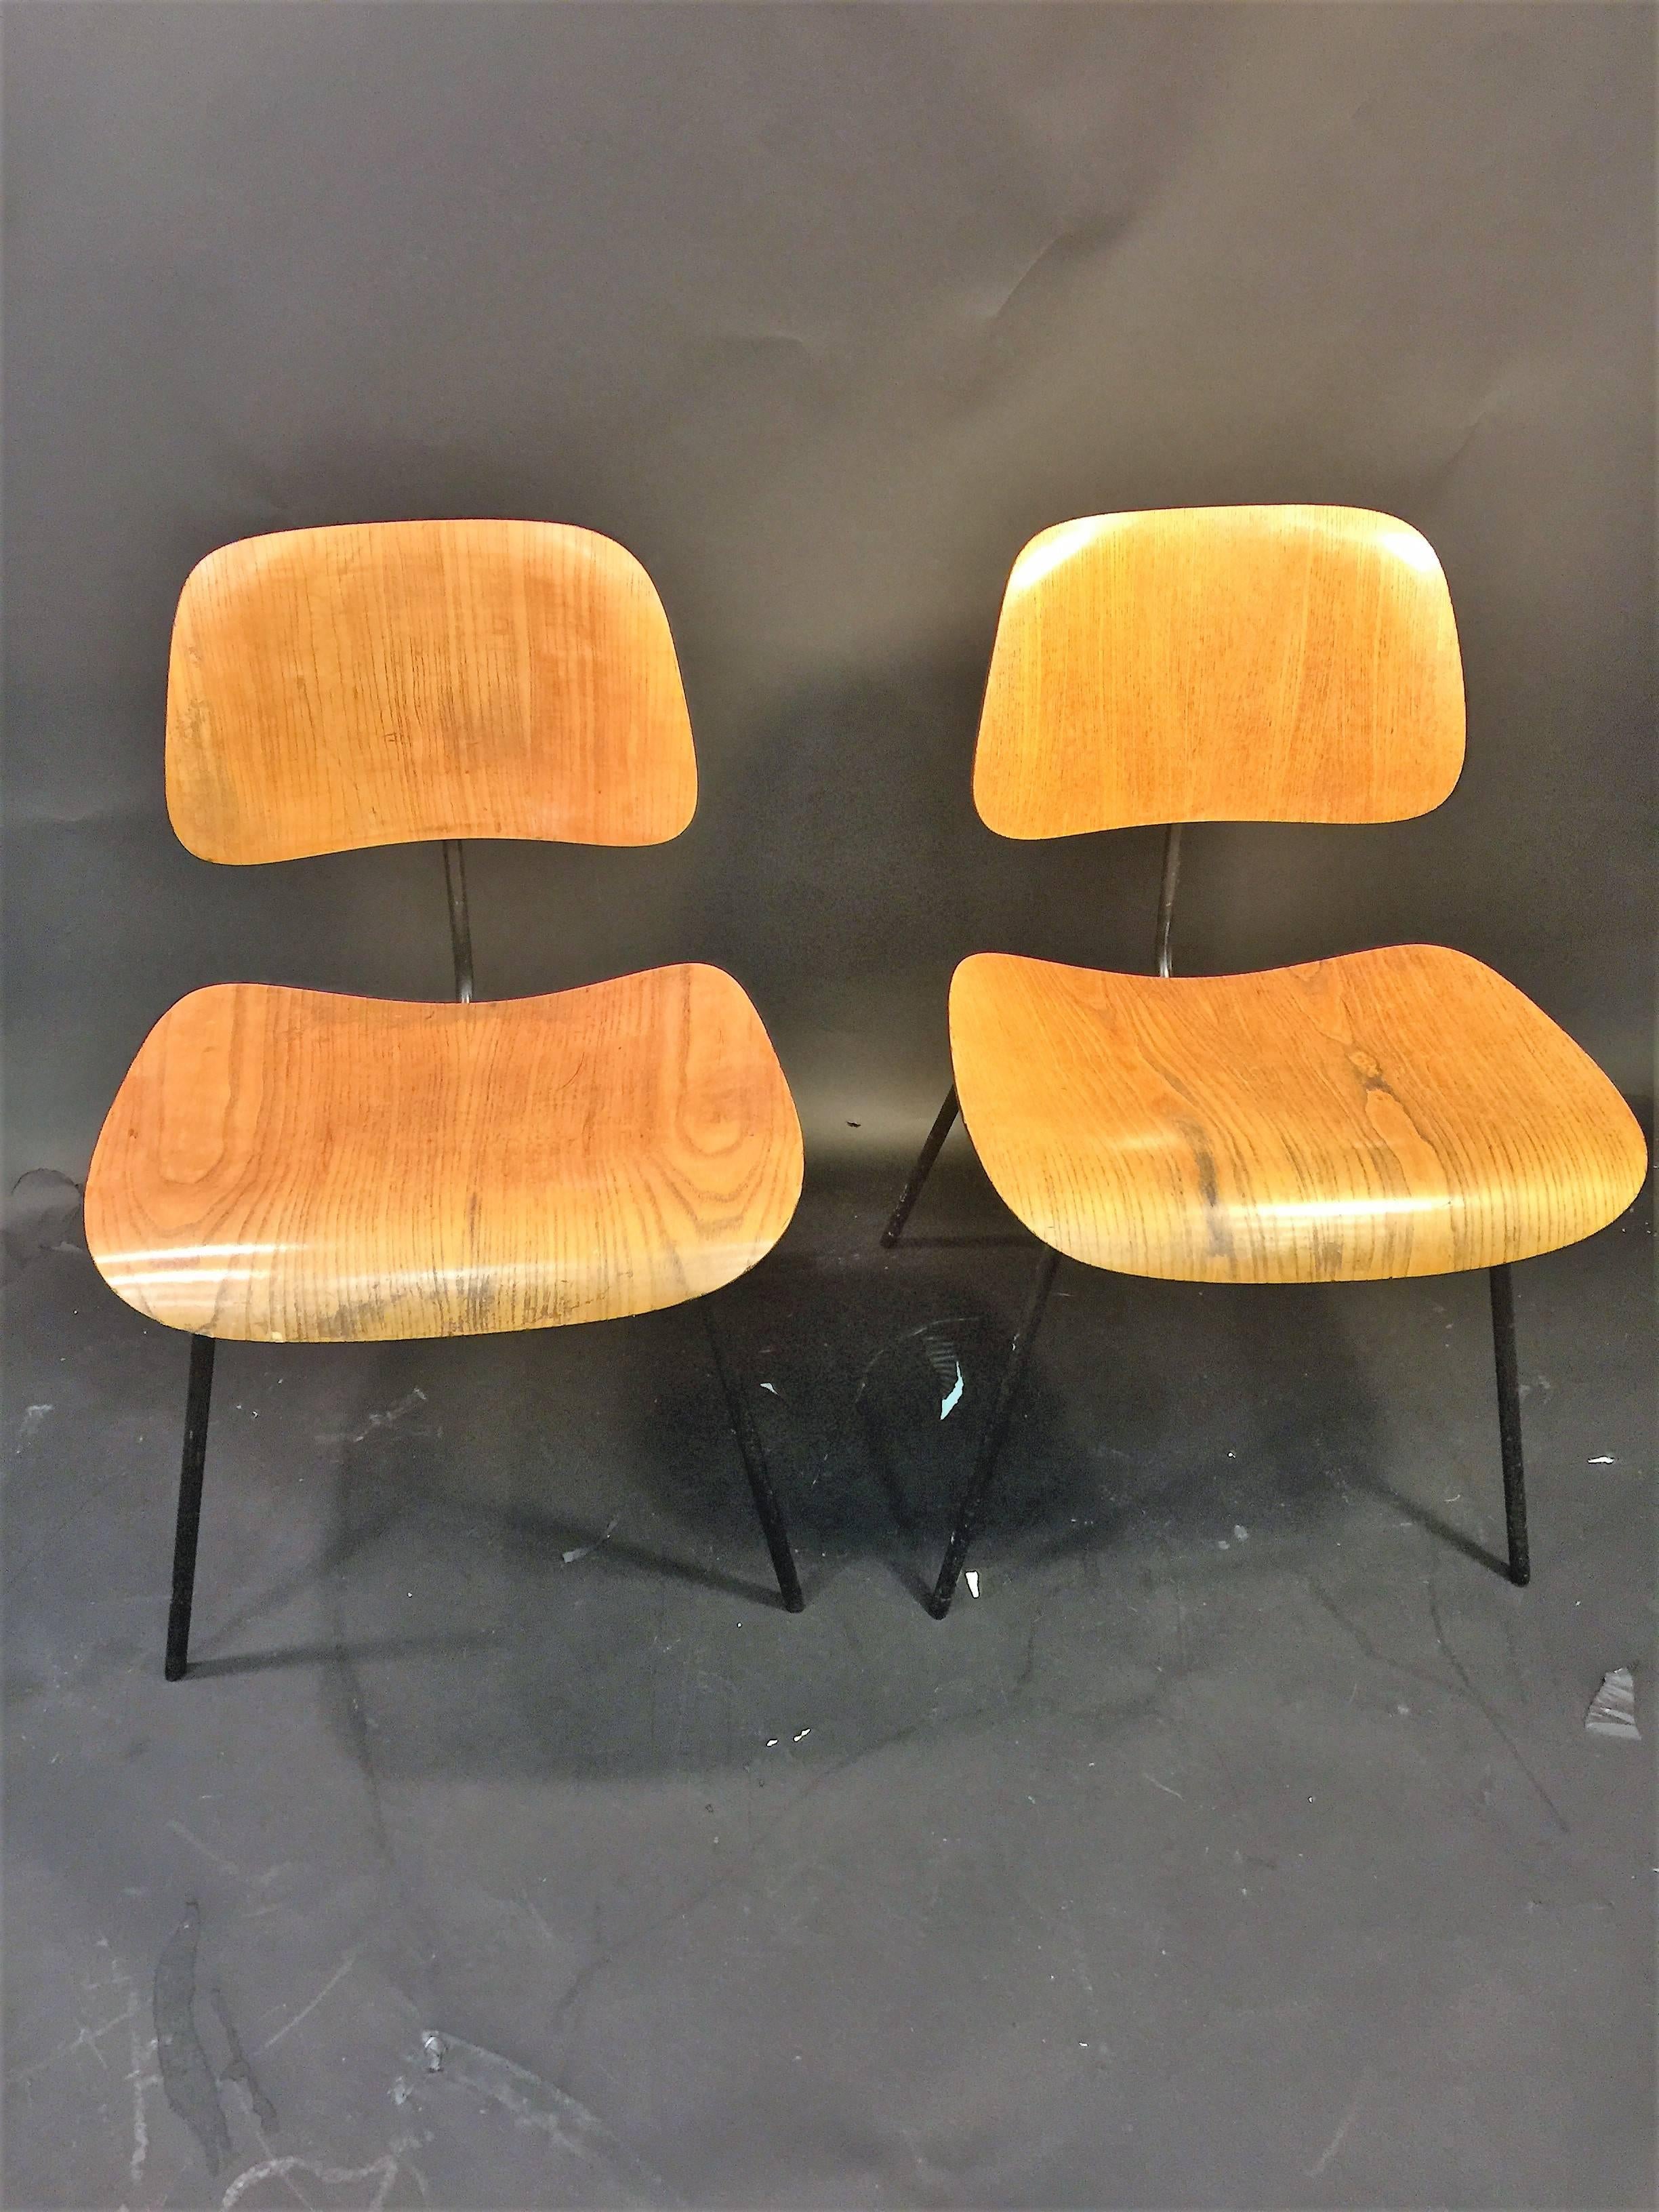 Pair of Mid-Century wood and black iron dining chairs designed by Charles Eames Made By Herman Miller in the 1950s. In original condition with some veneer chips as shown in photos.